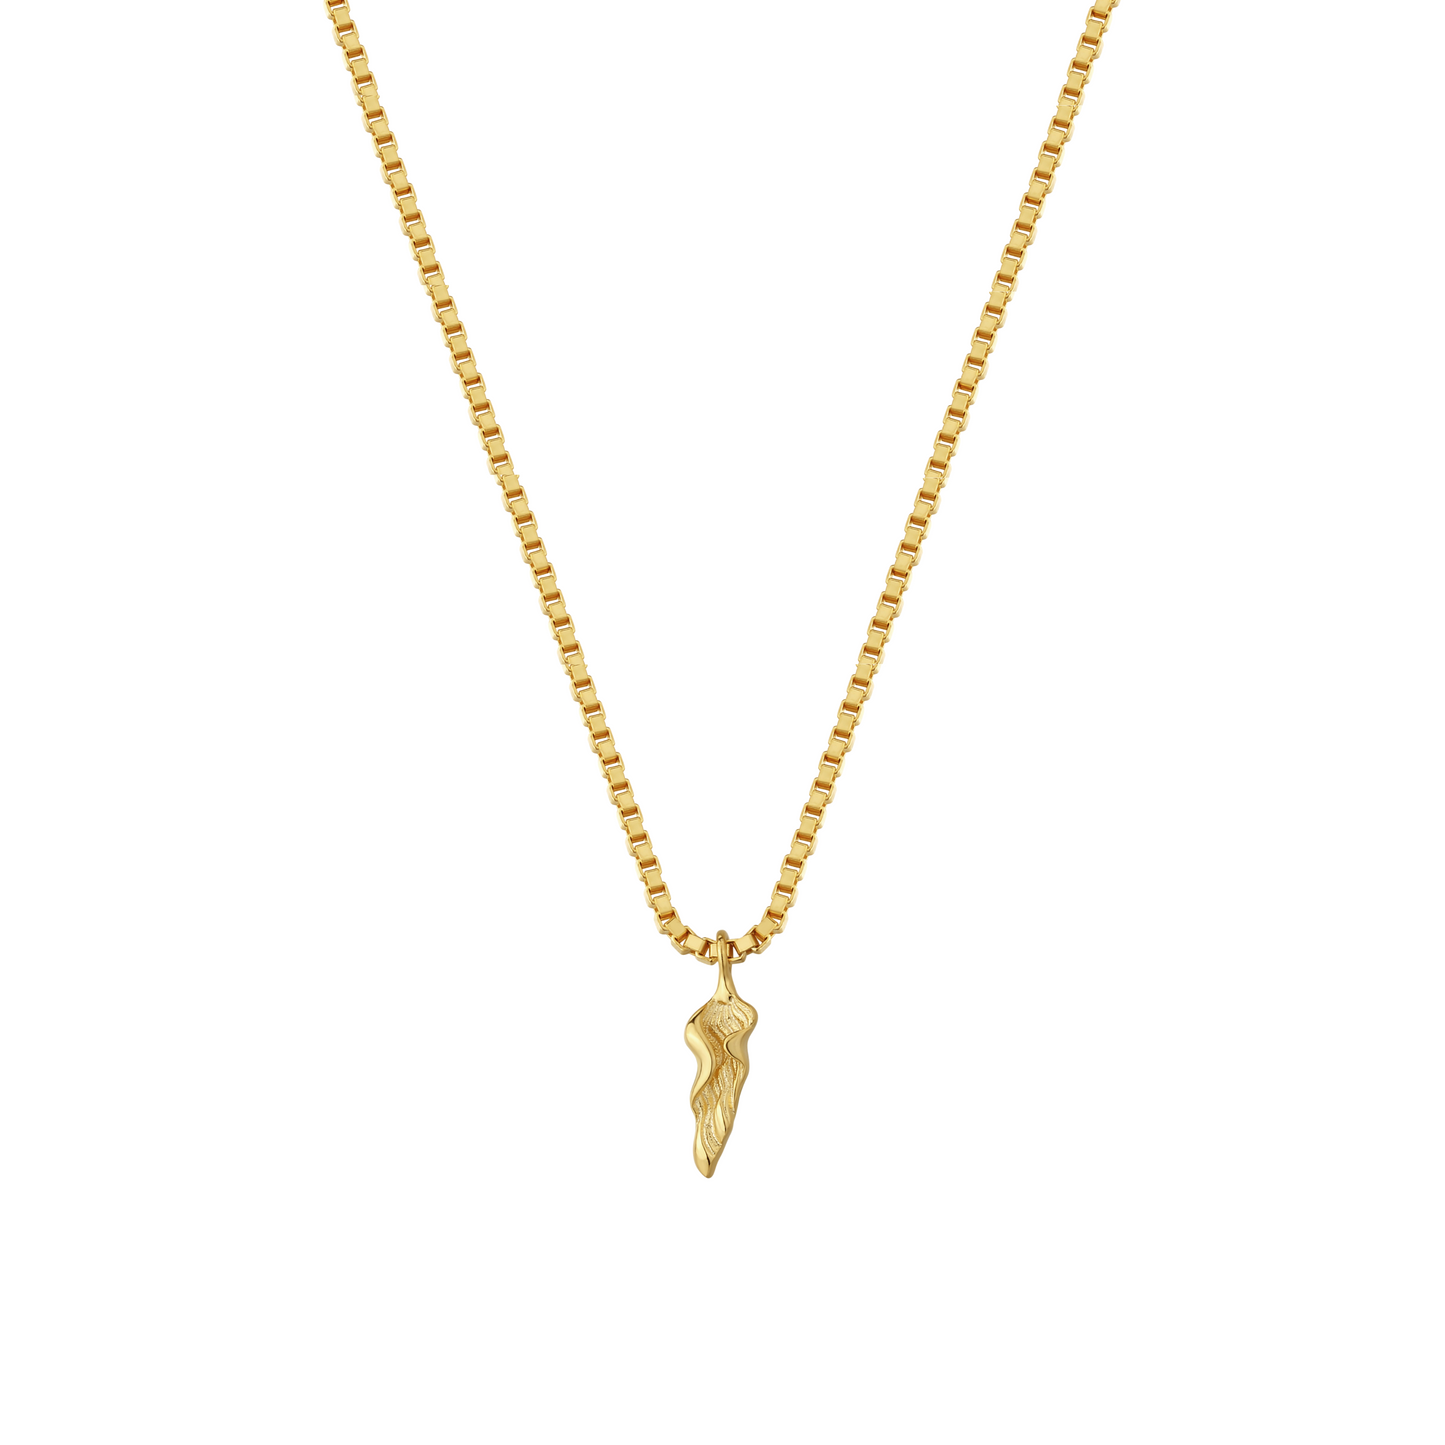 Hirenaga Necklace / Gold Plated